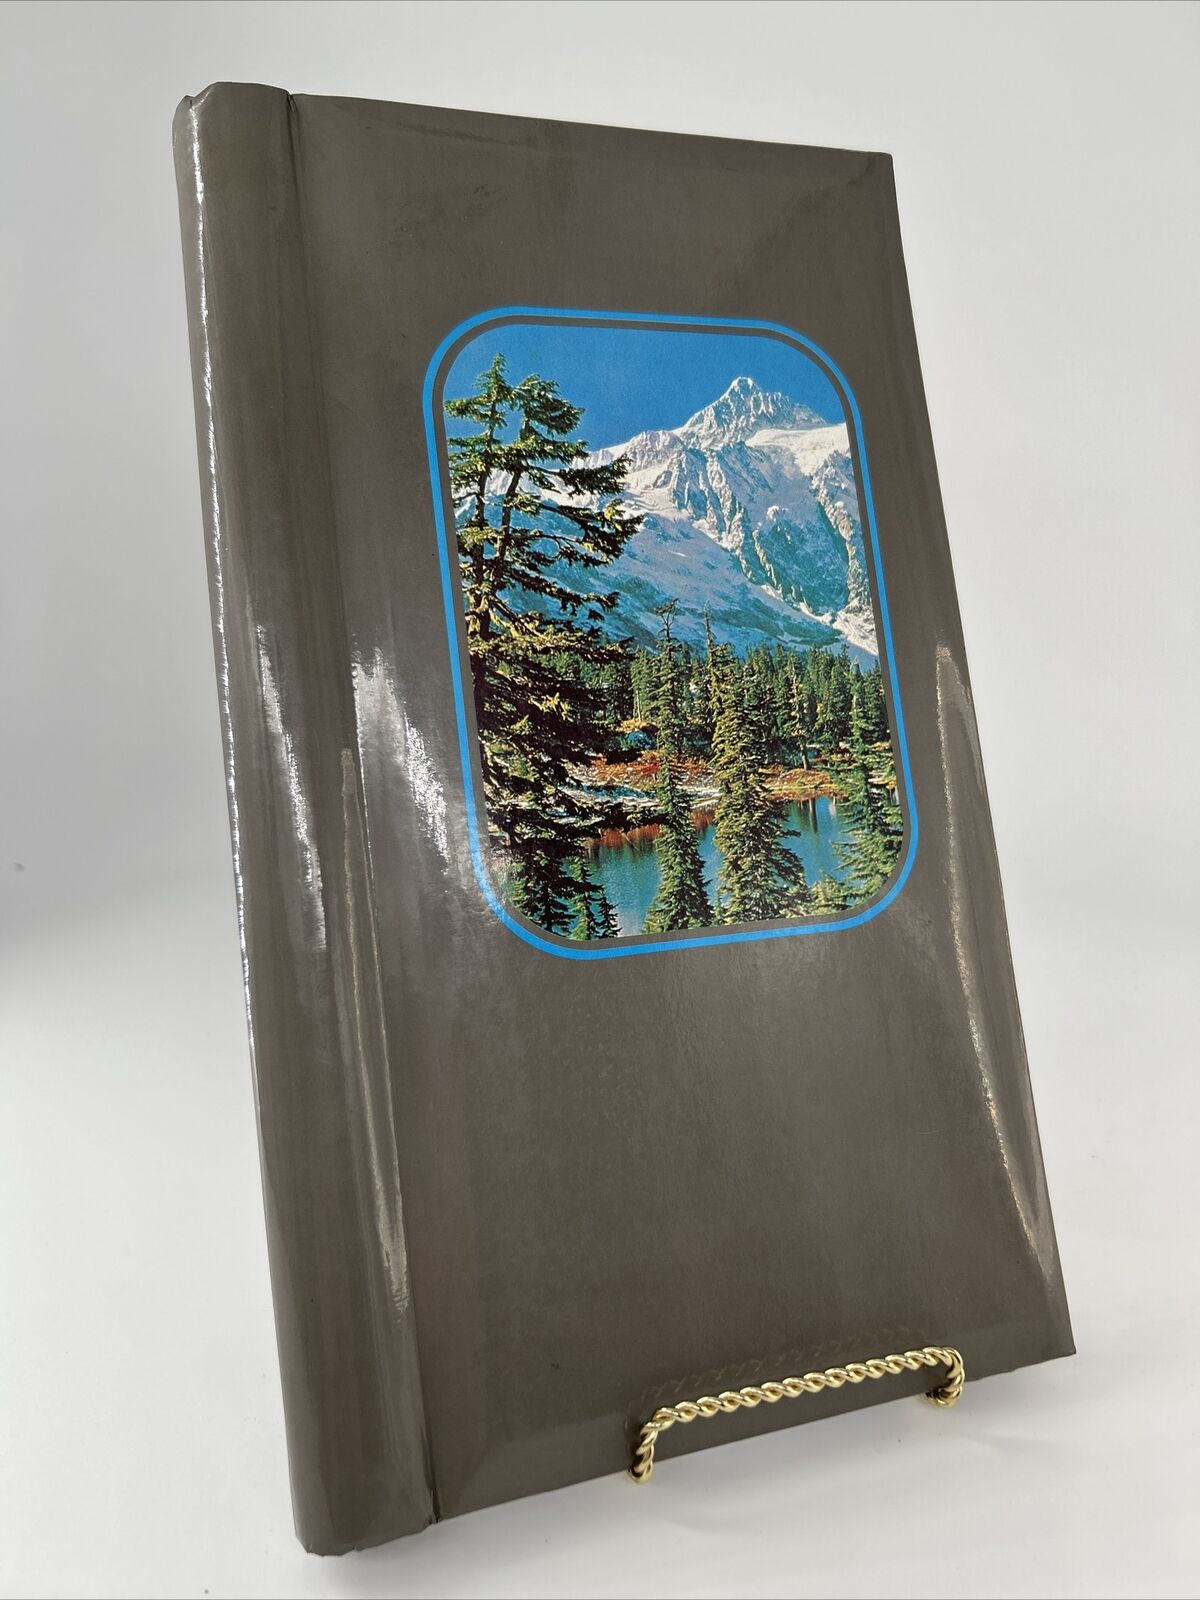 Vintage 80s Photo Album Binder Empty With Mountain Forest Design Front And Back